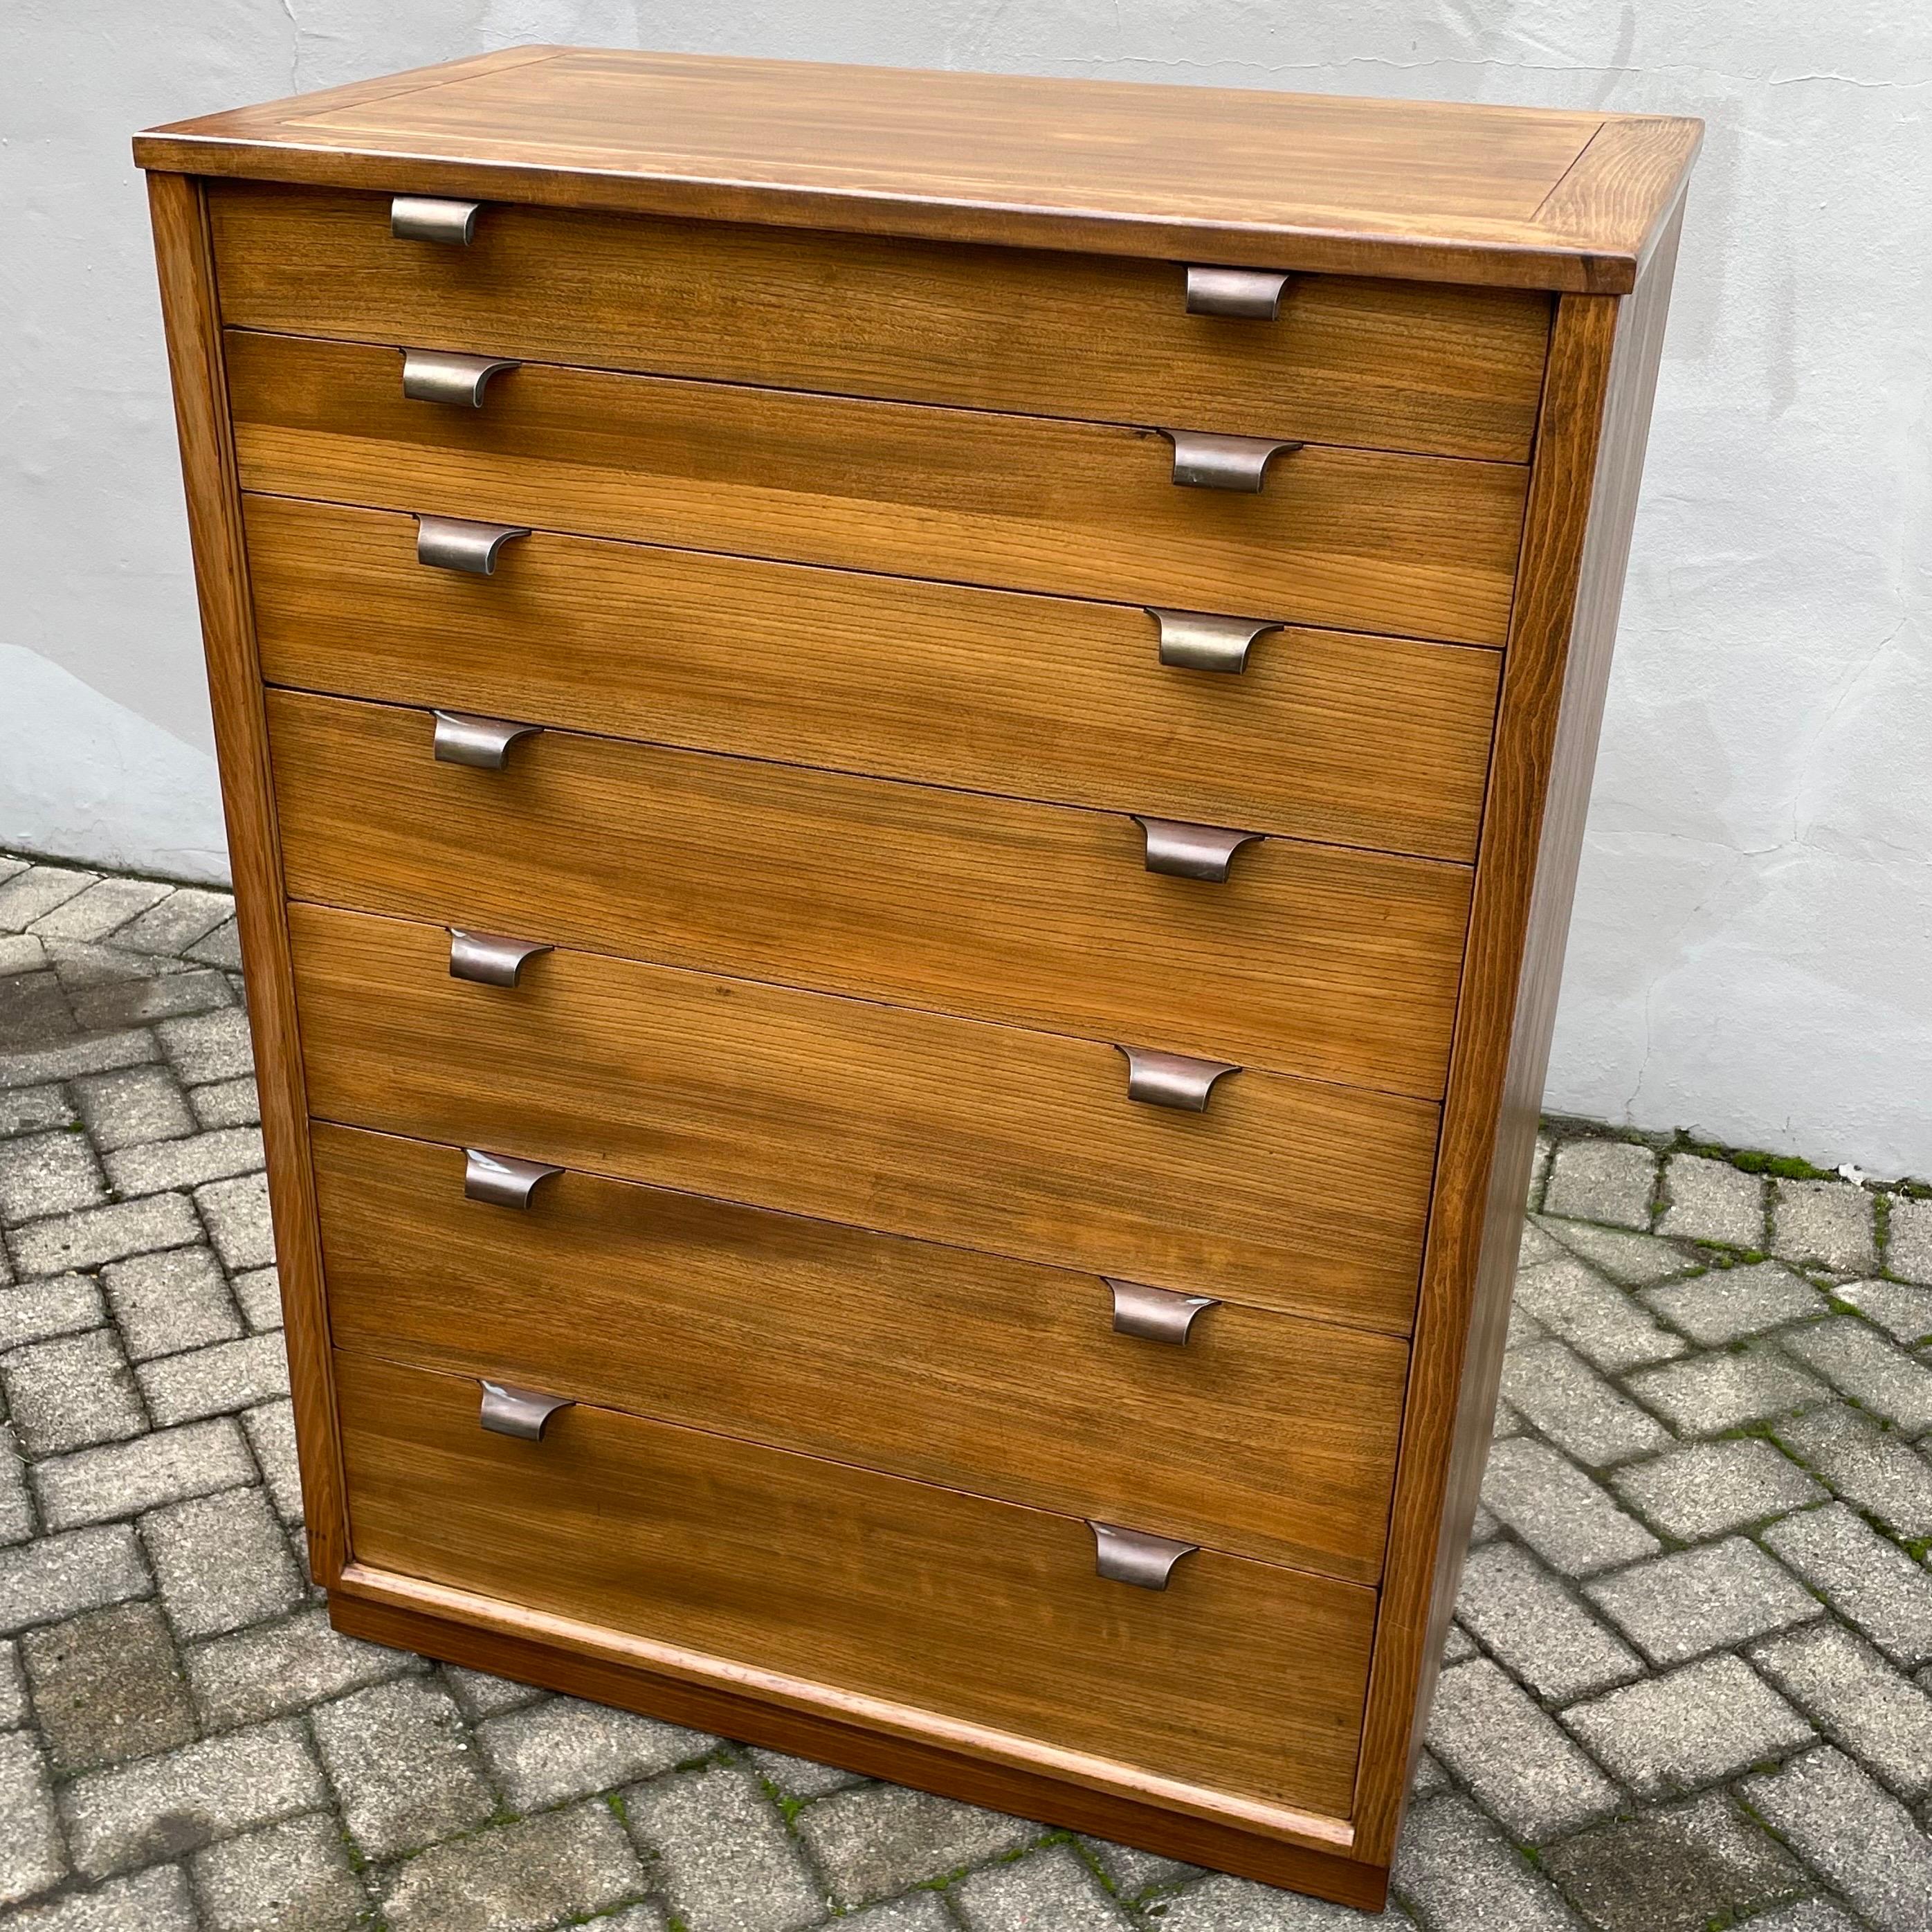 Beautiful mid century dresser by Edward Wormley for Drexel.  This piece is from the Precedent series circa 1950's, very rare stained white elm, professionally refinished.